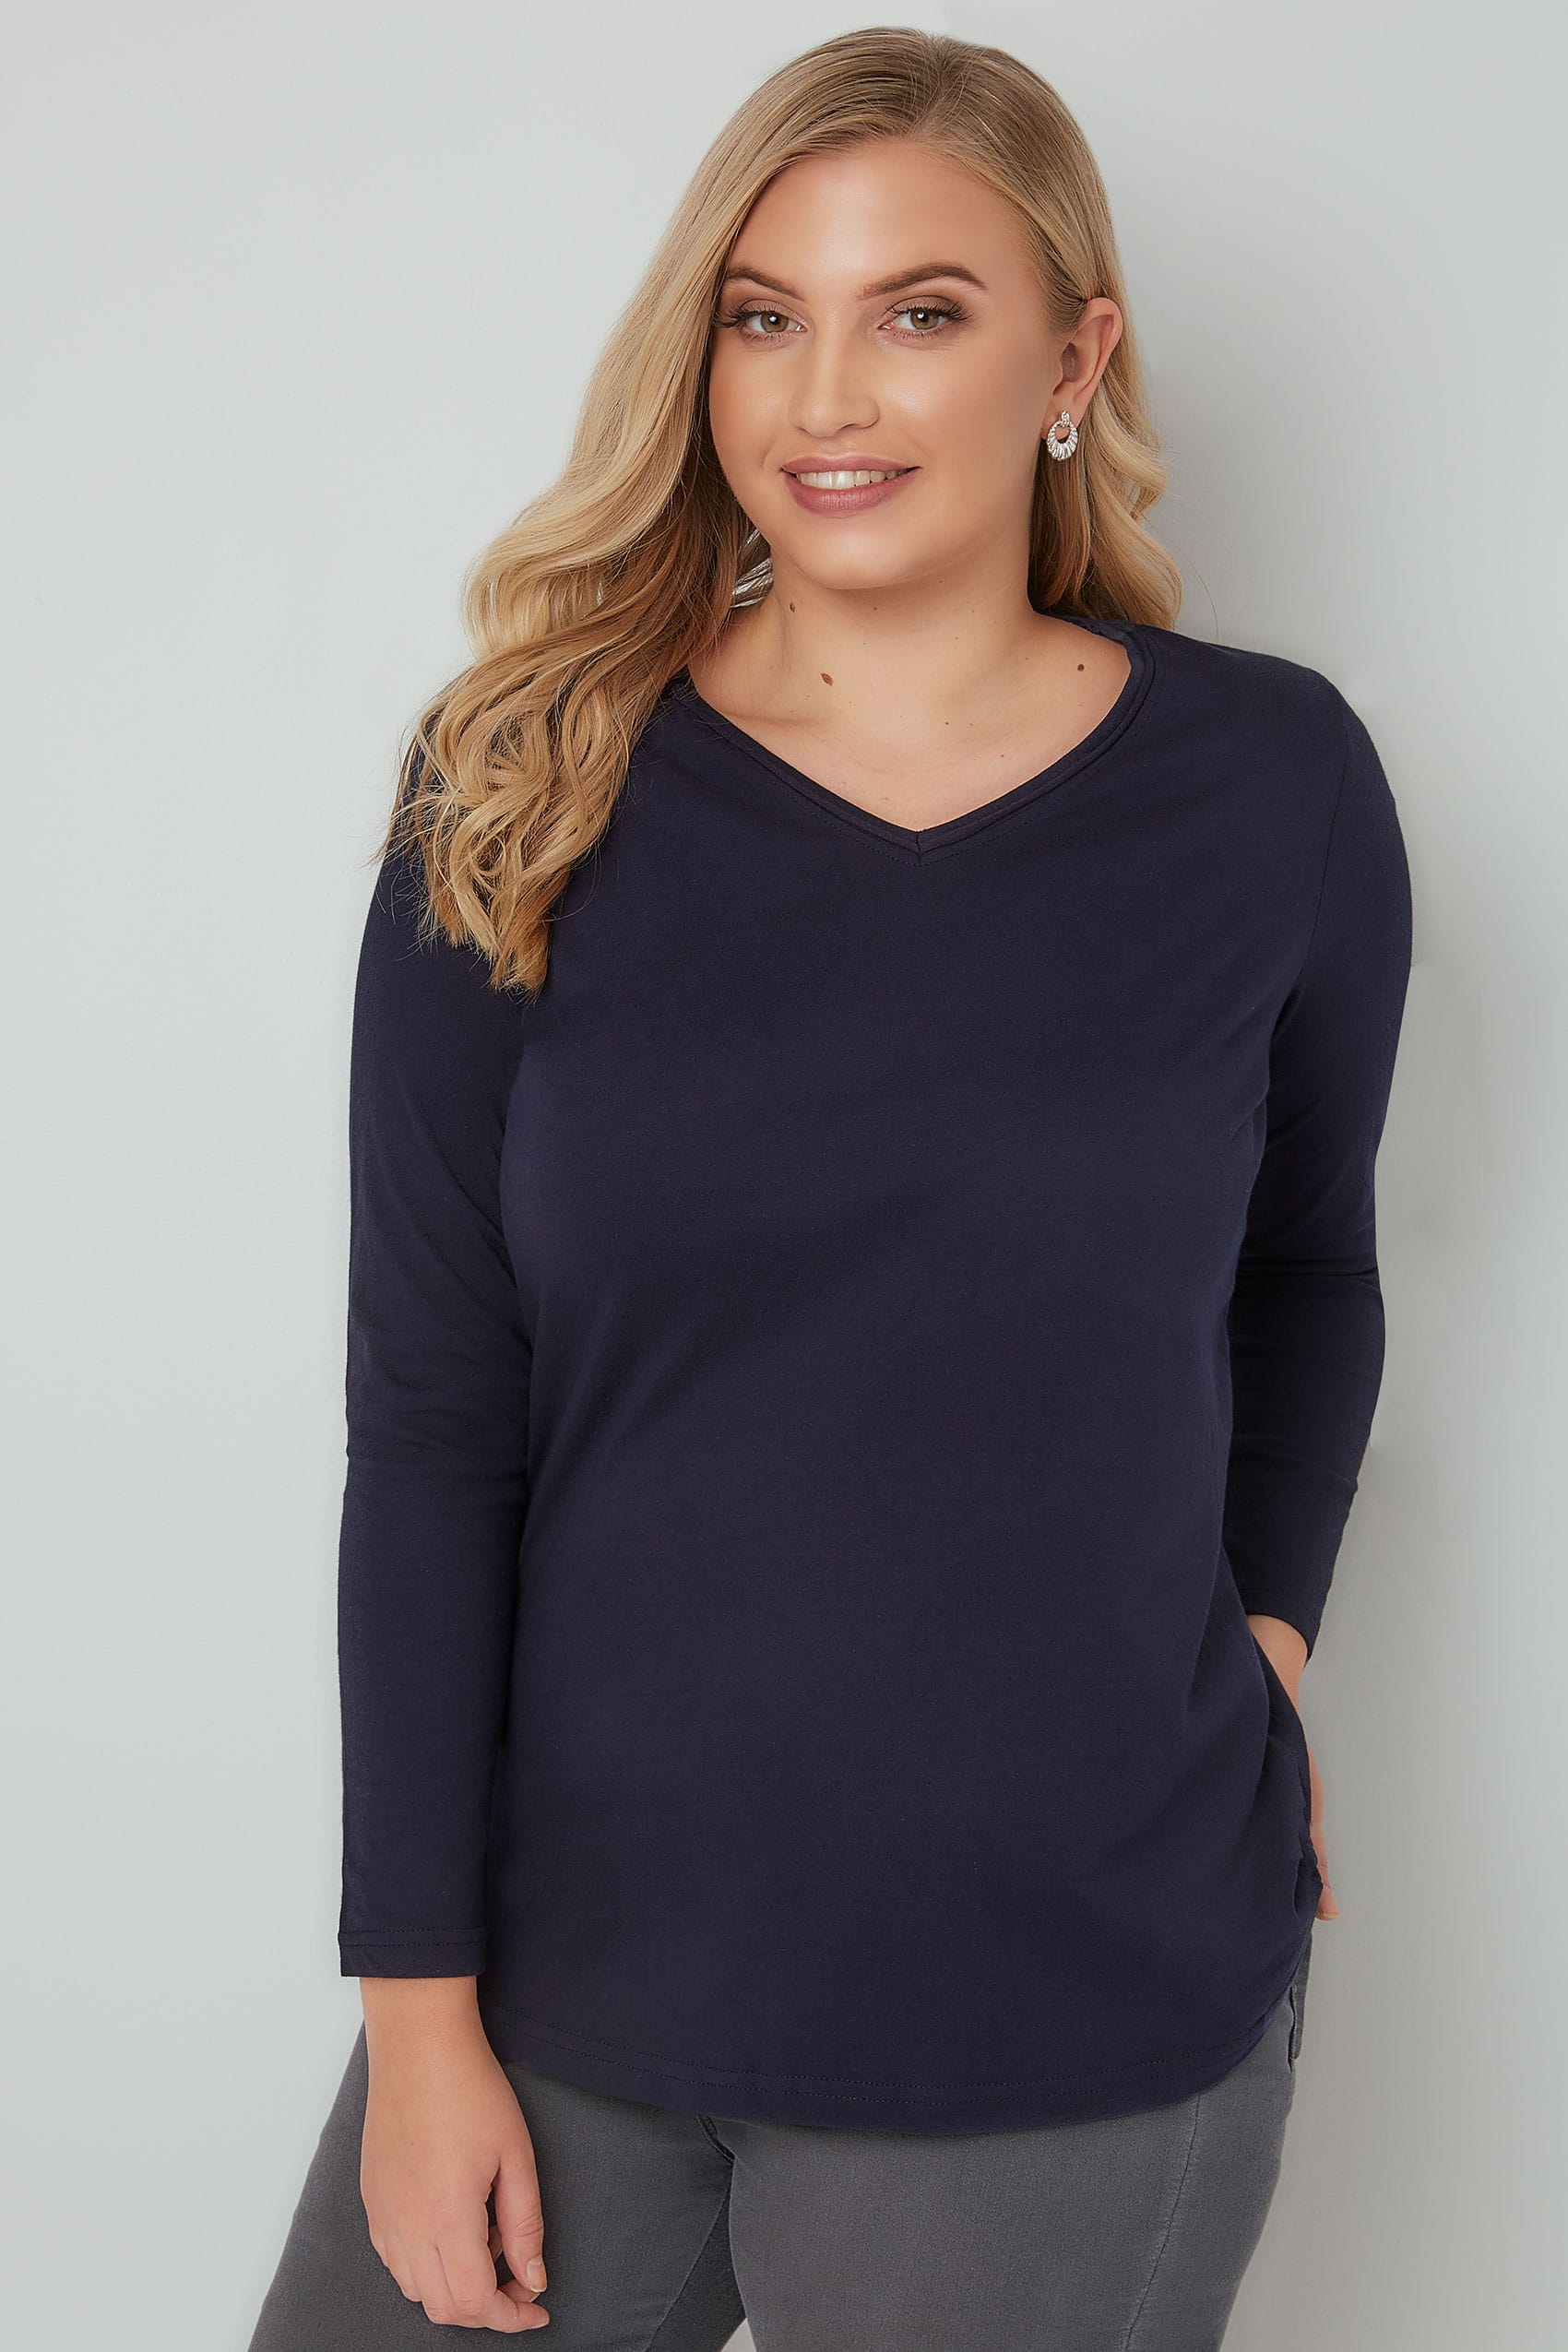 Pink Marl Long Sleeved V-Neck Jersey Top, Plus size 16 to 36